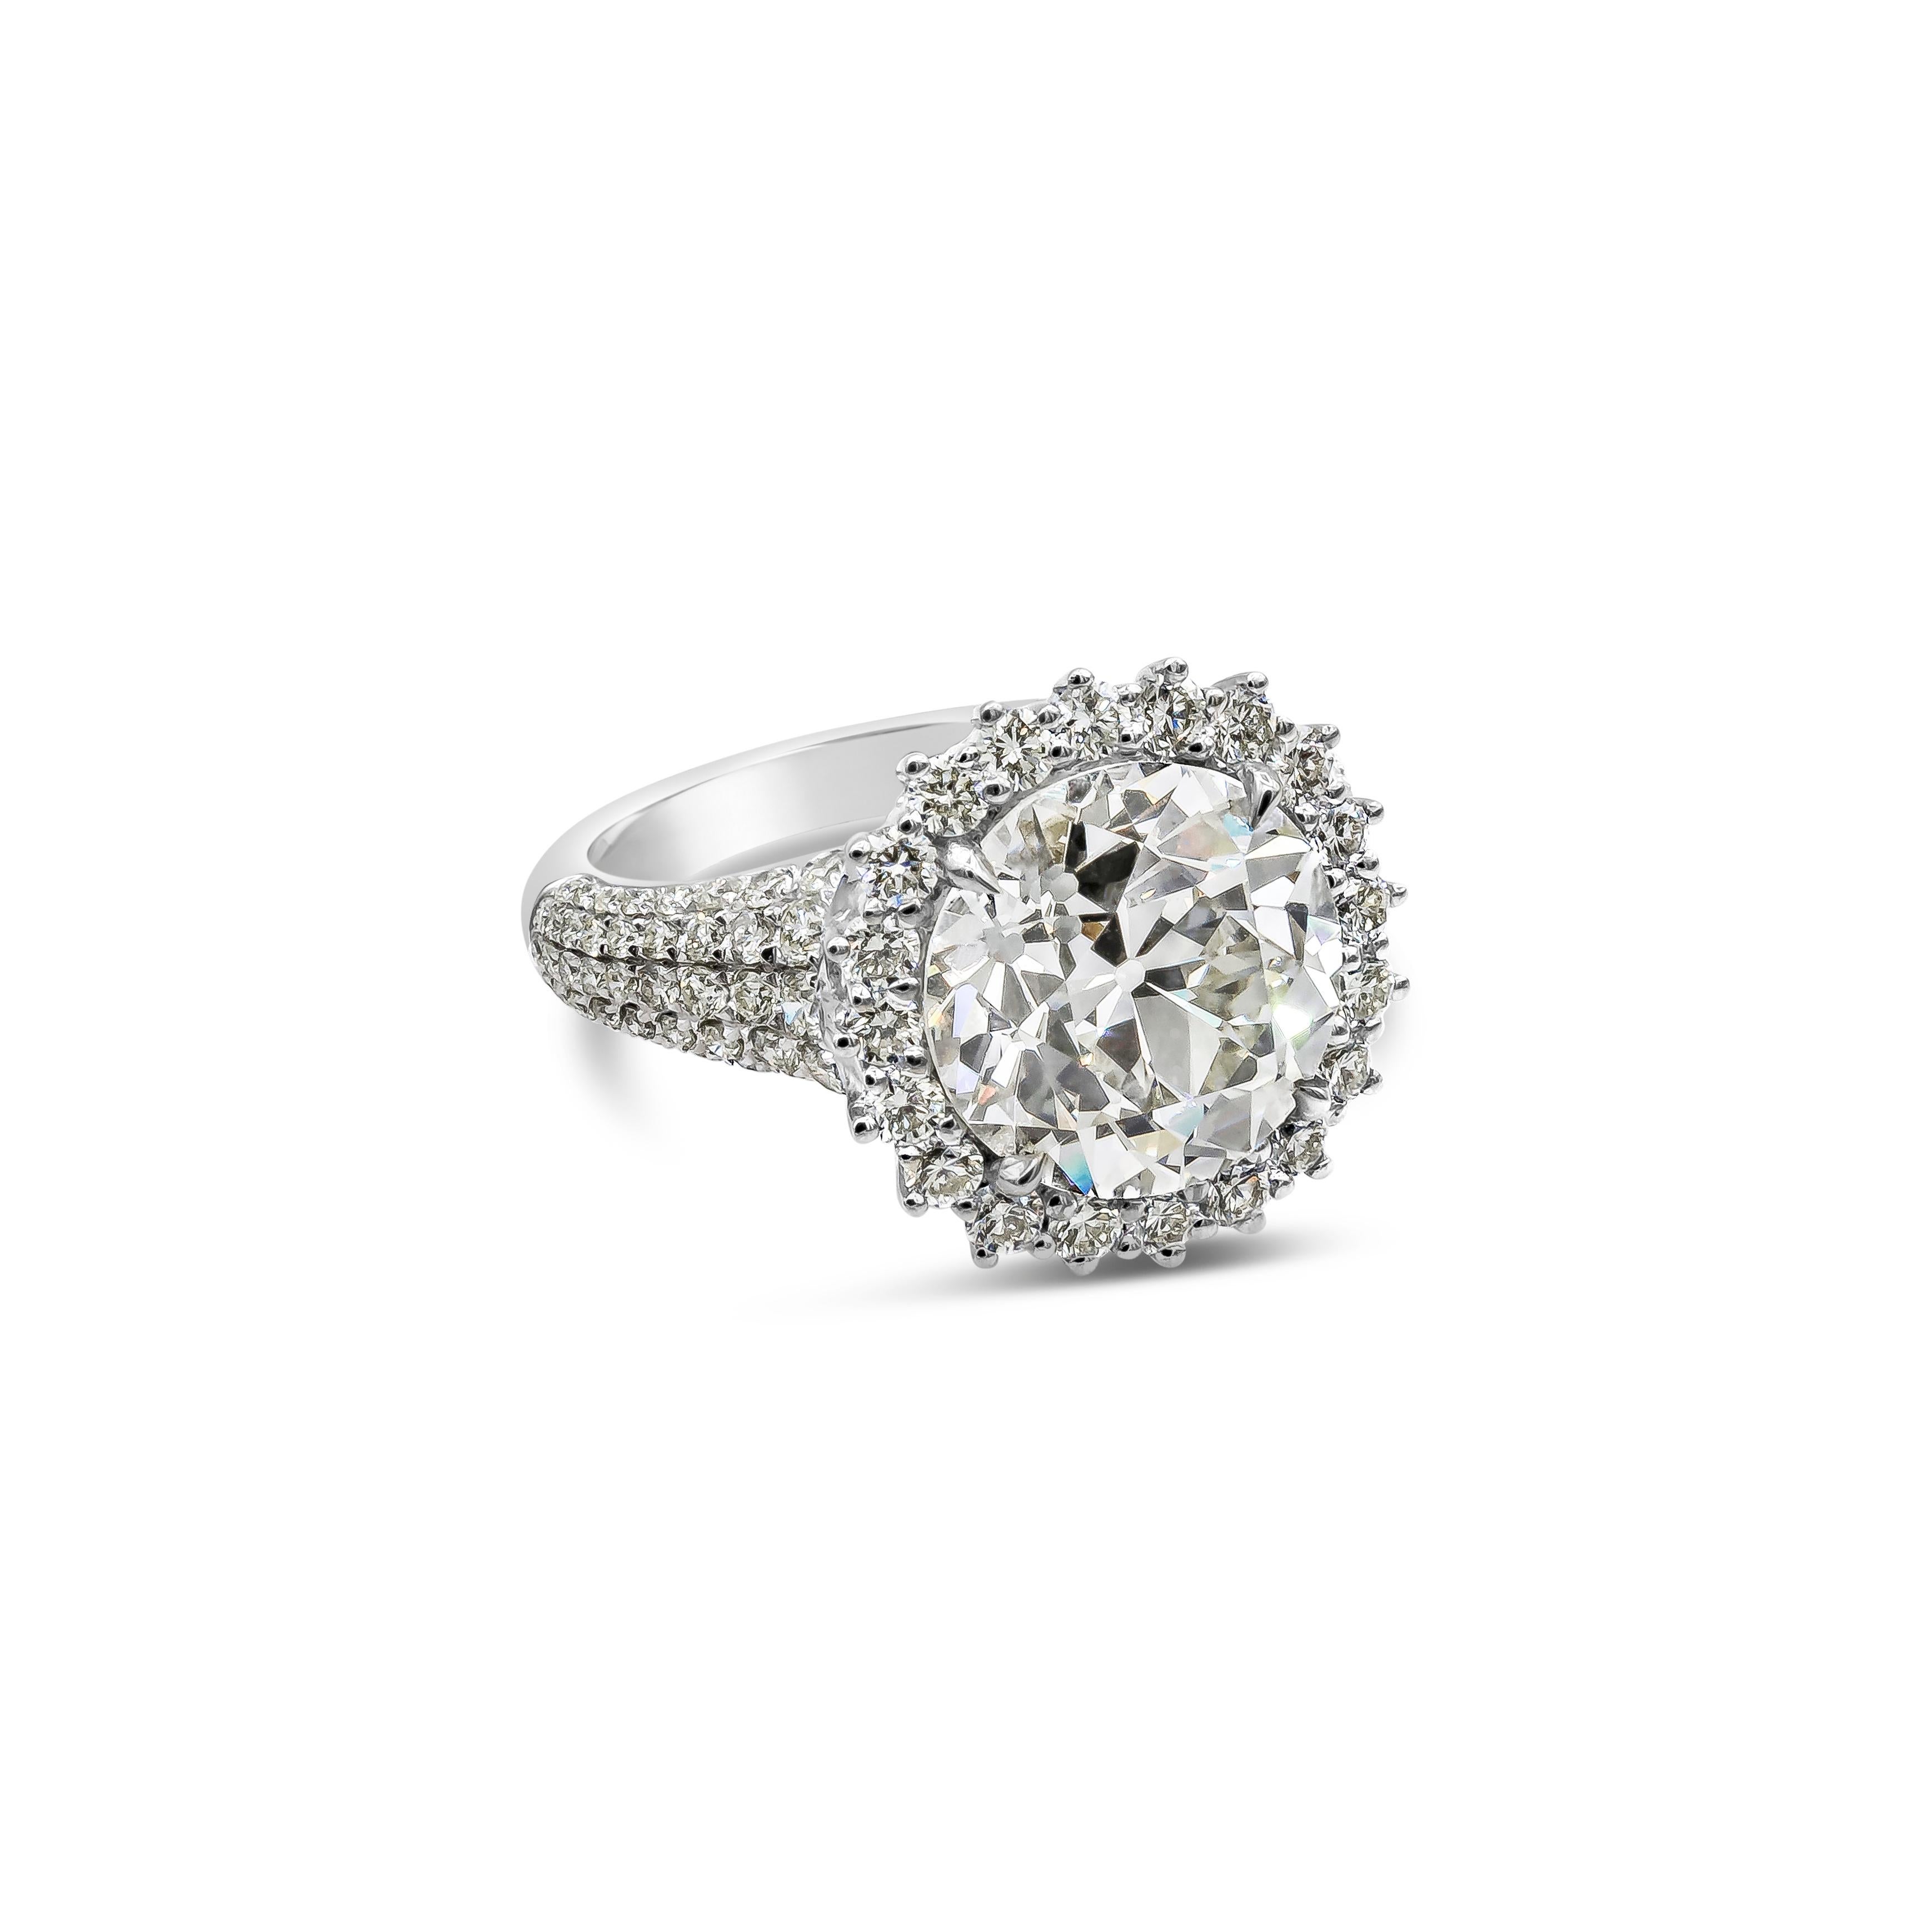 A unique and brilliant piece of jewelry featuring a 5.56 carats old European cut diamond, certified by GIA as M color, VS2 in clarity. Surrounded by a single row of round brilliant diamonds. Set in a micro-pave diamond shank setting. Accent diamonds